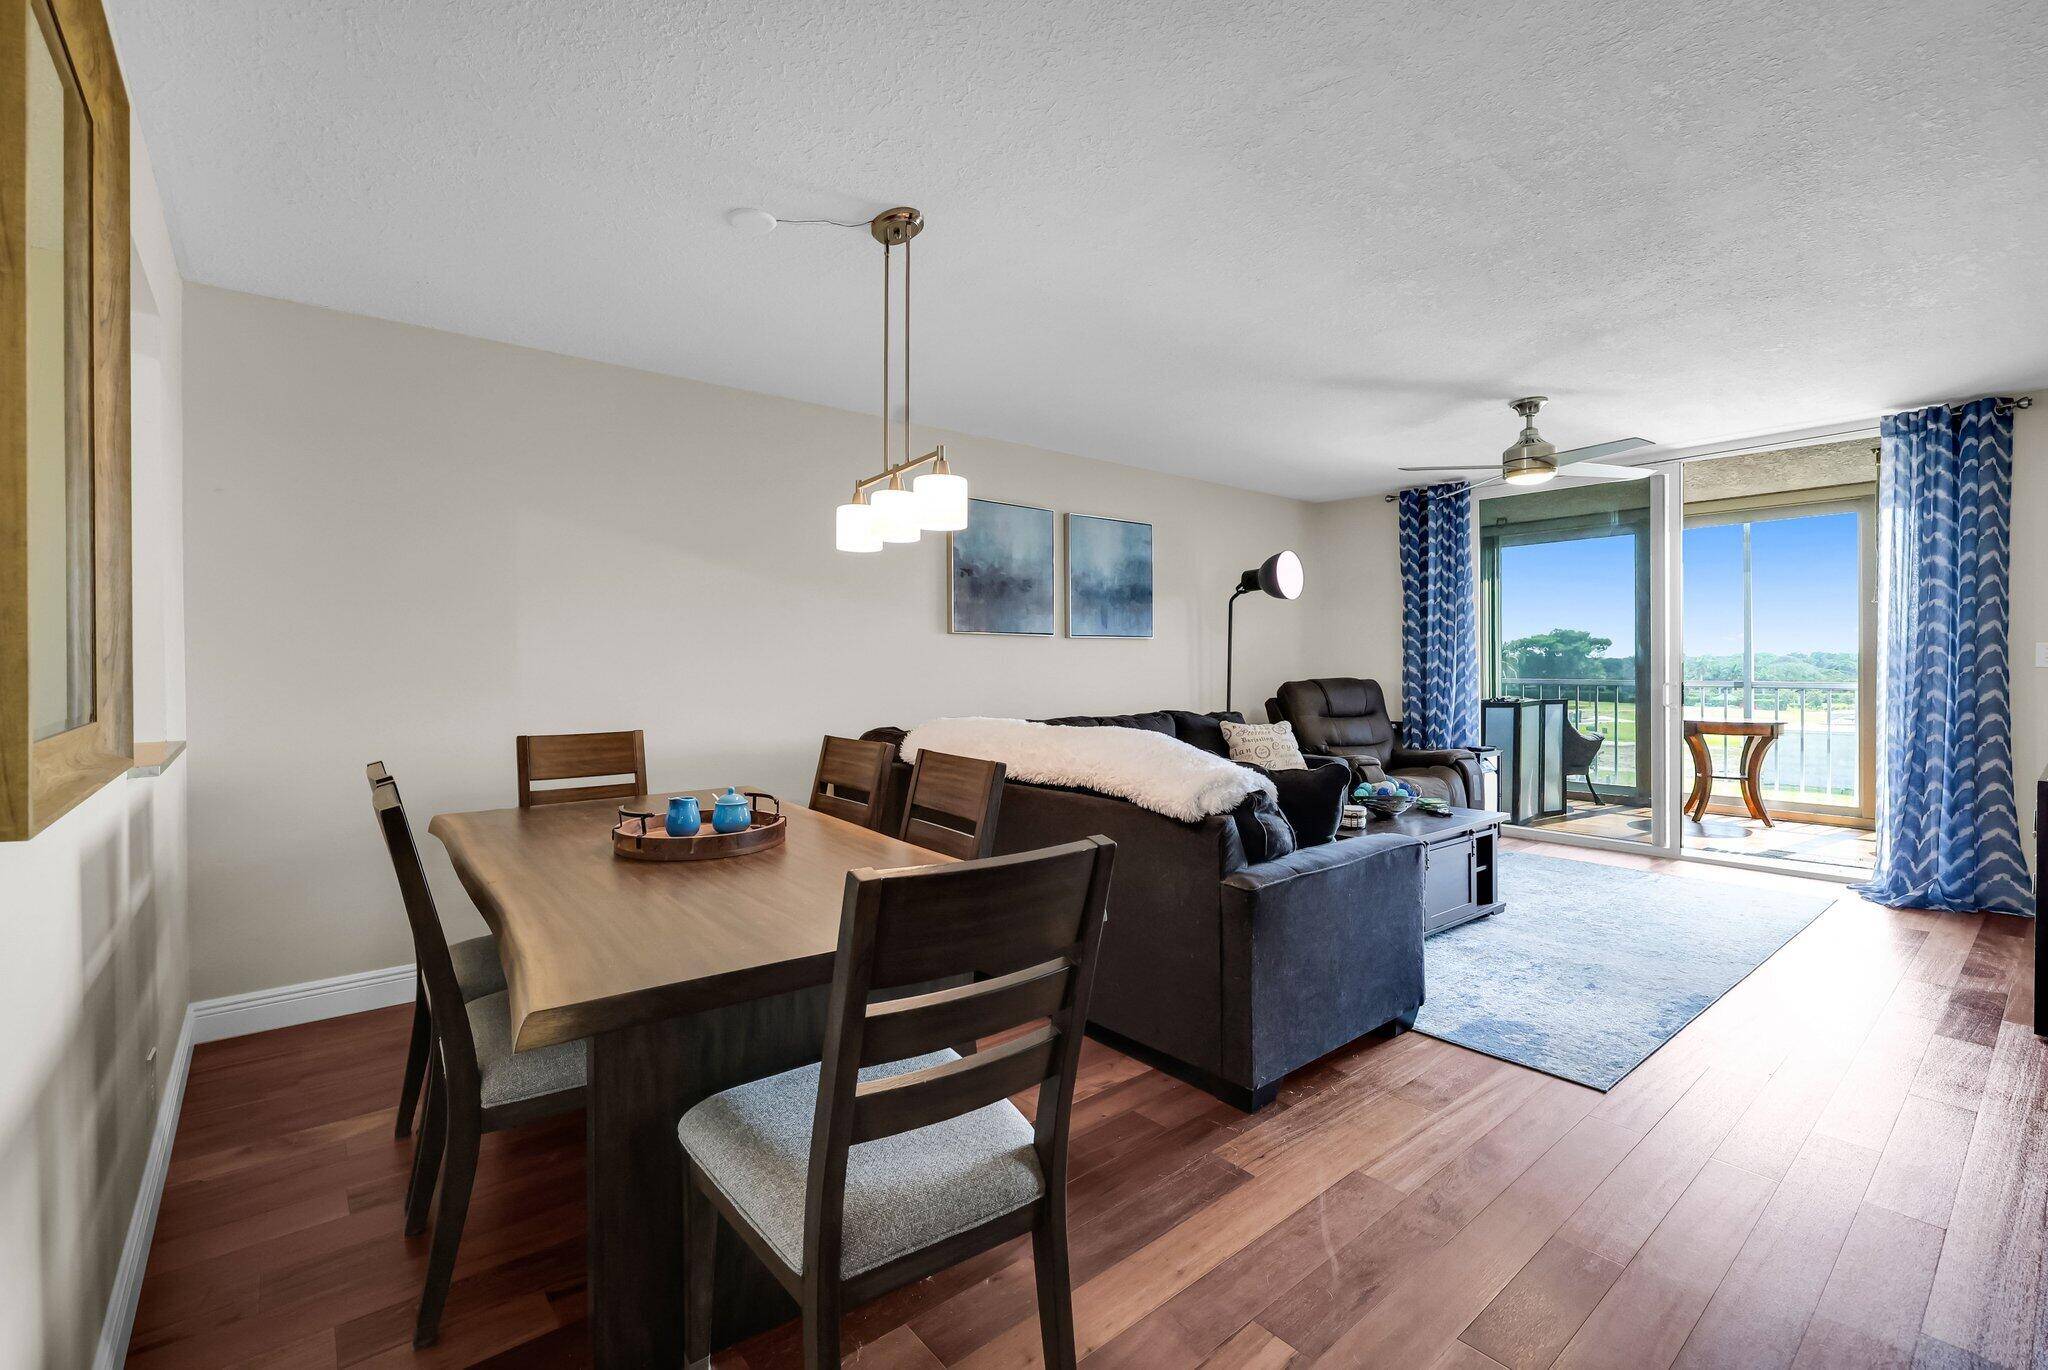 Discover this move in ready 1BR condo in Crystal Lake, combining style with modern convenience.